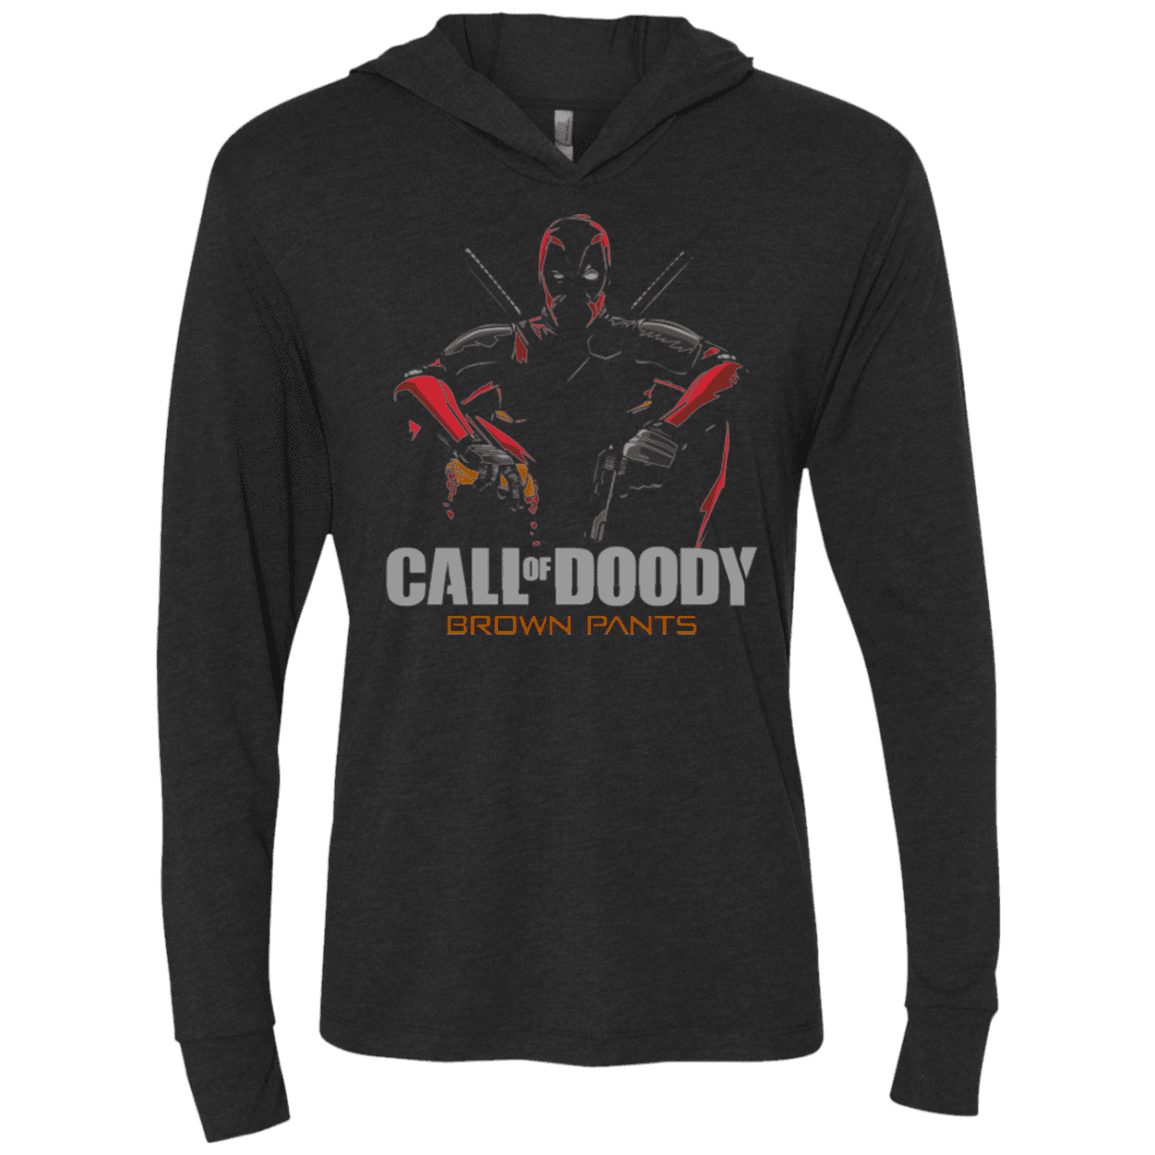 T-Shirts Vintage Black / X-Small Call of Doody Triblend Long Sleeve Hoodie Tee